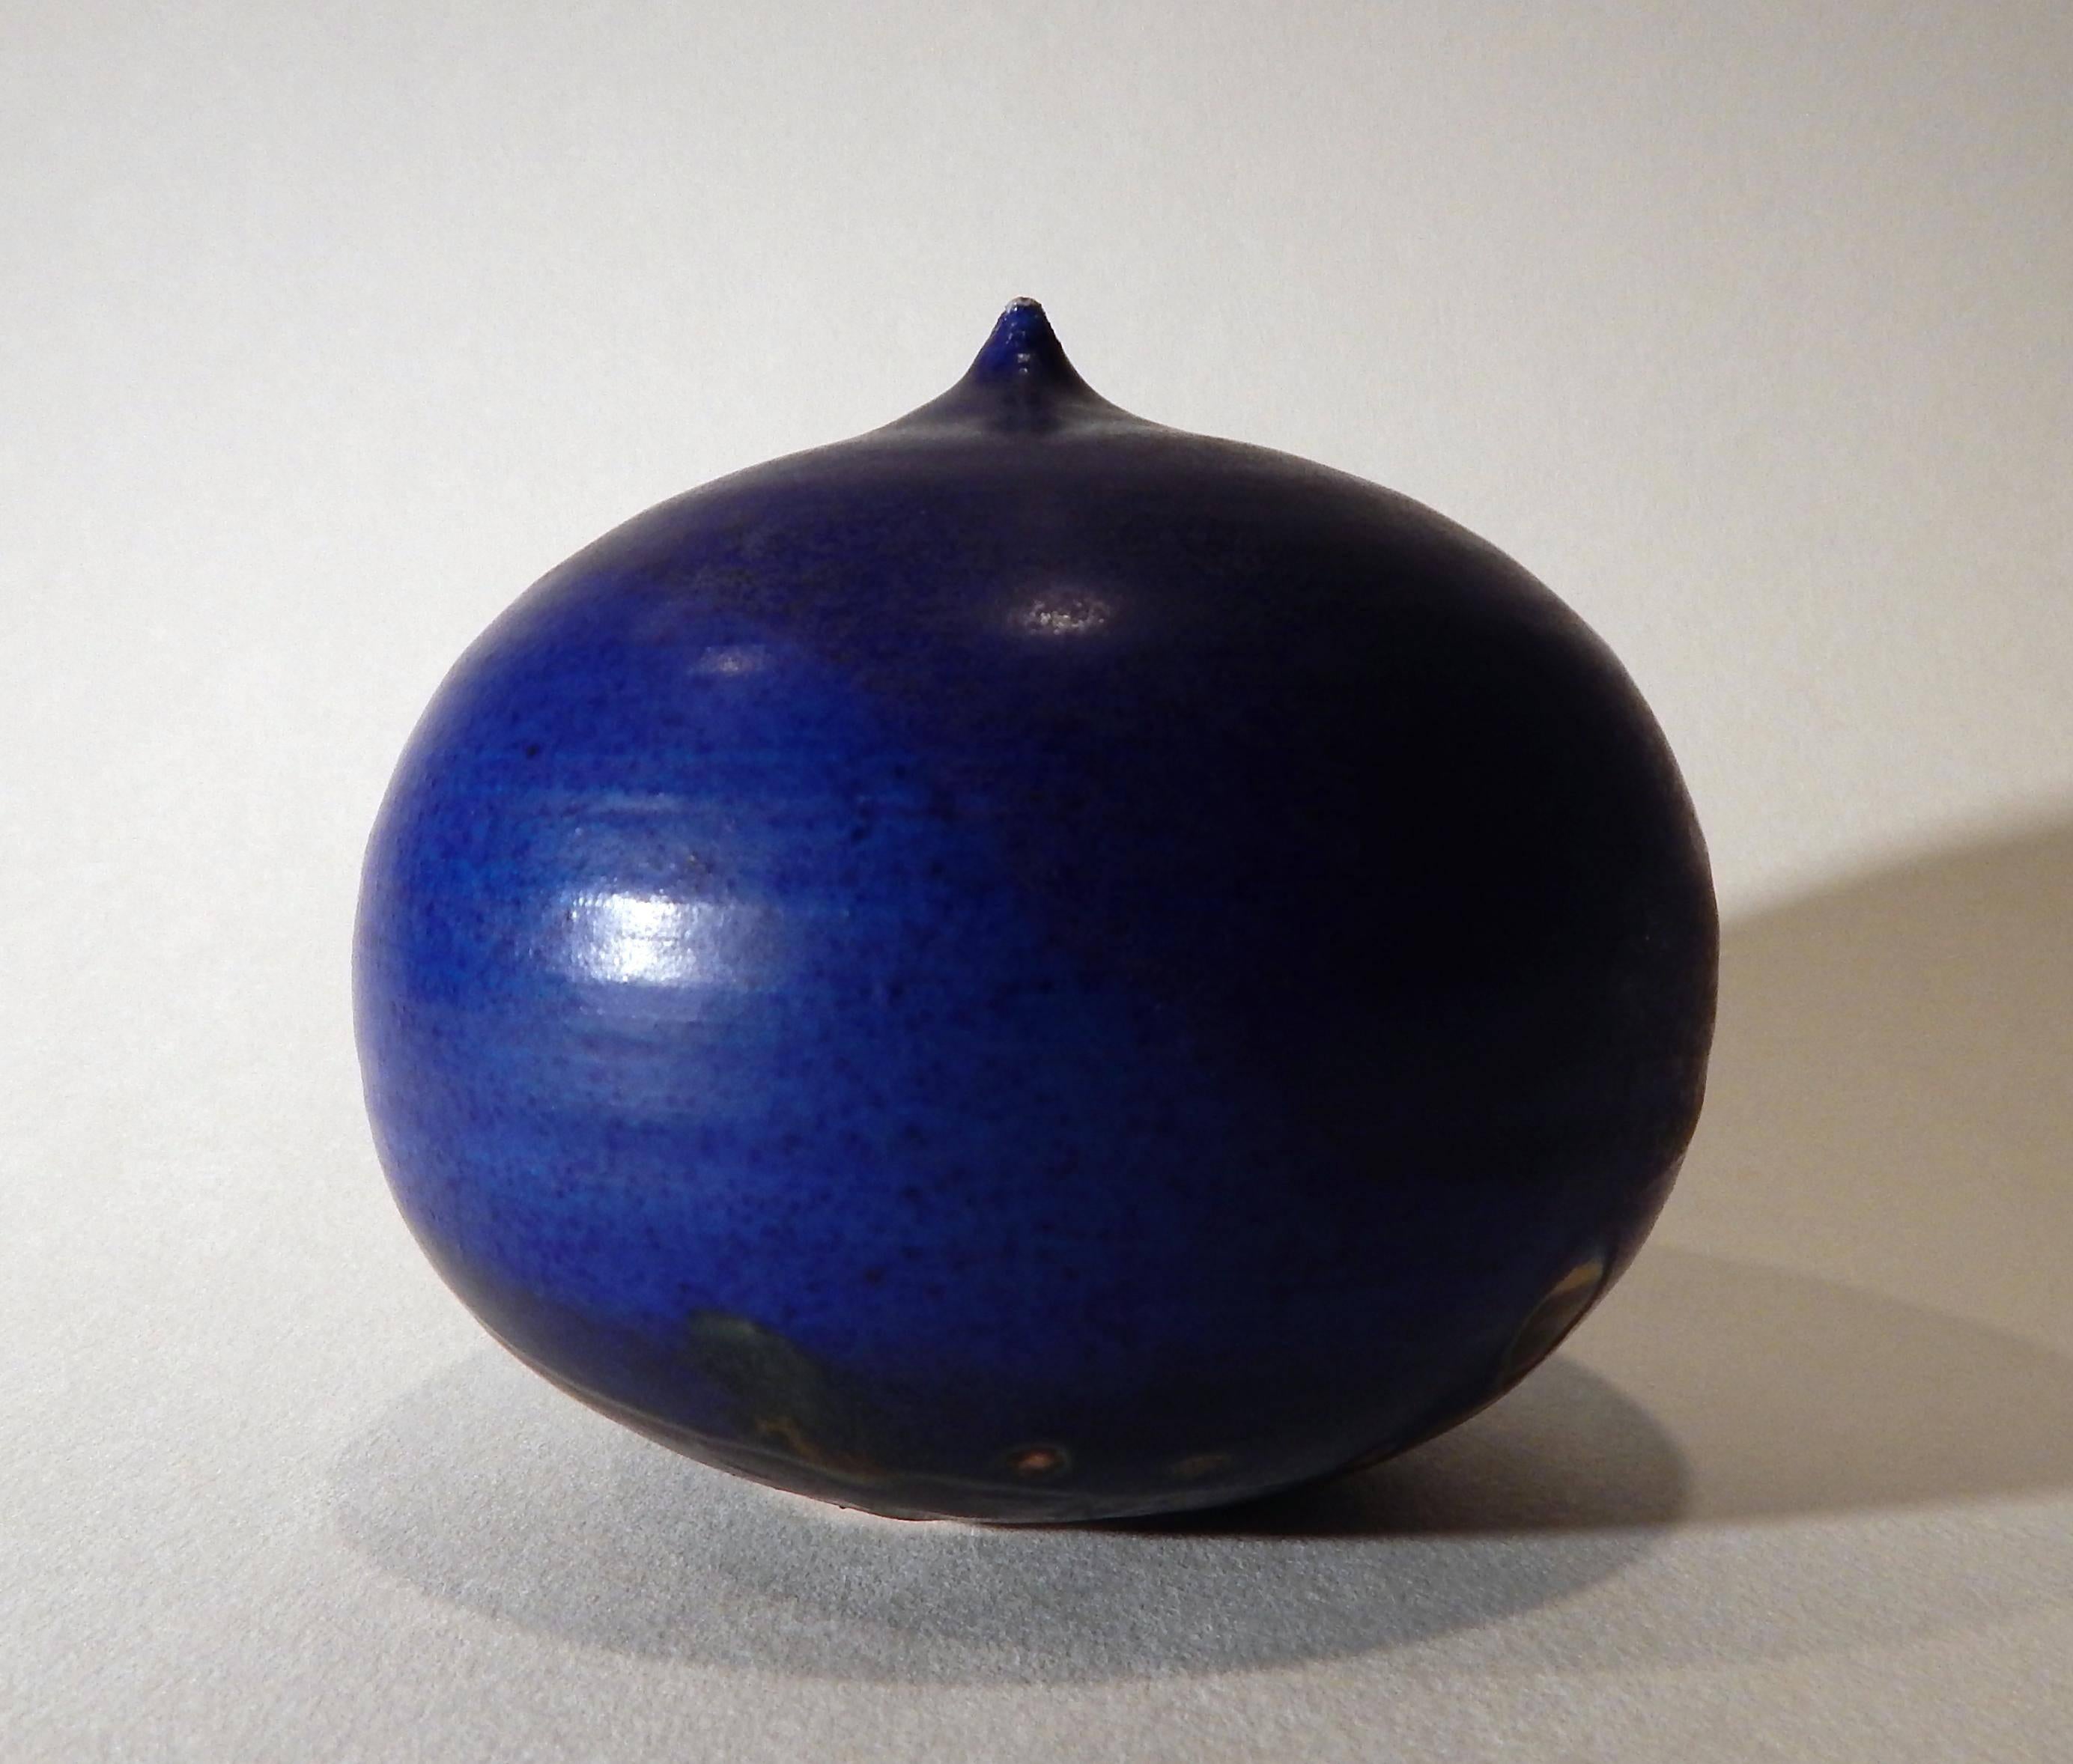 Toshiko Takaezu Studio Moon Pot, cobalt blue
Measures: 4" H x 4.25" D.
Marked on the bottom: TT (faintly impressed)
Excellent condition.

Born in 1922, Toshiko Takaezu was a female Japanese-American ceramist born in Hawaii. Her closed